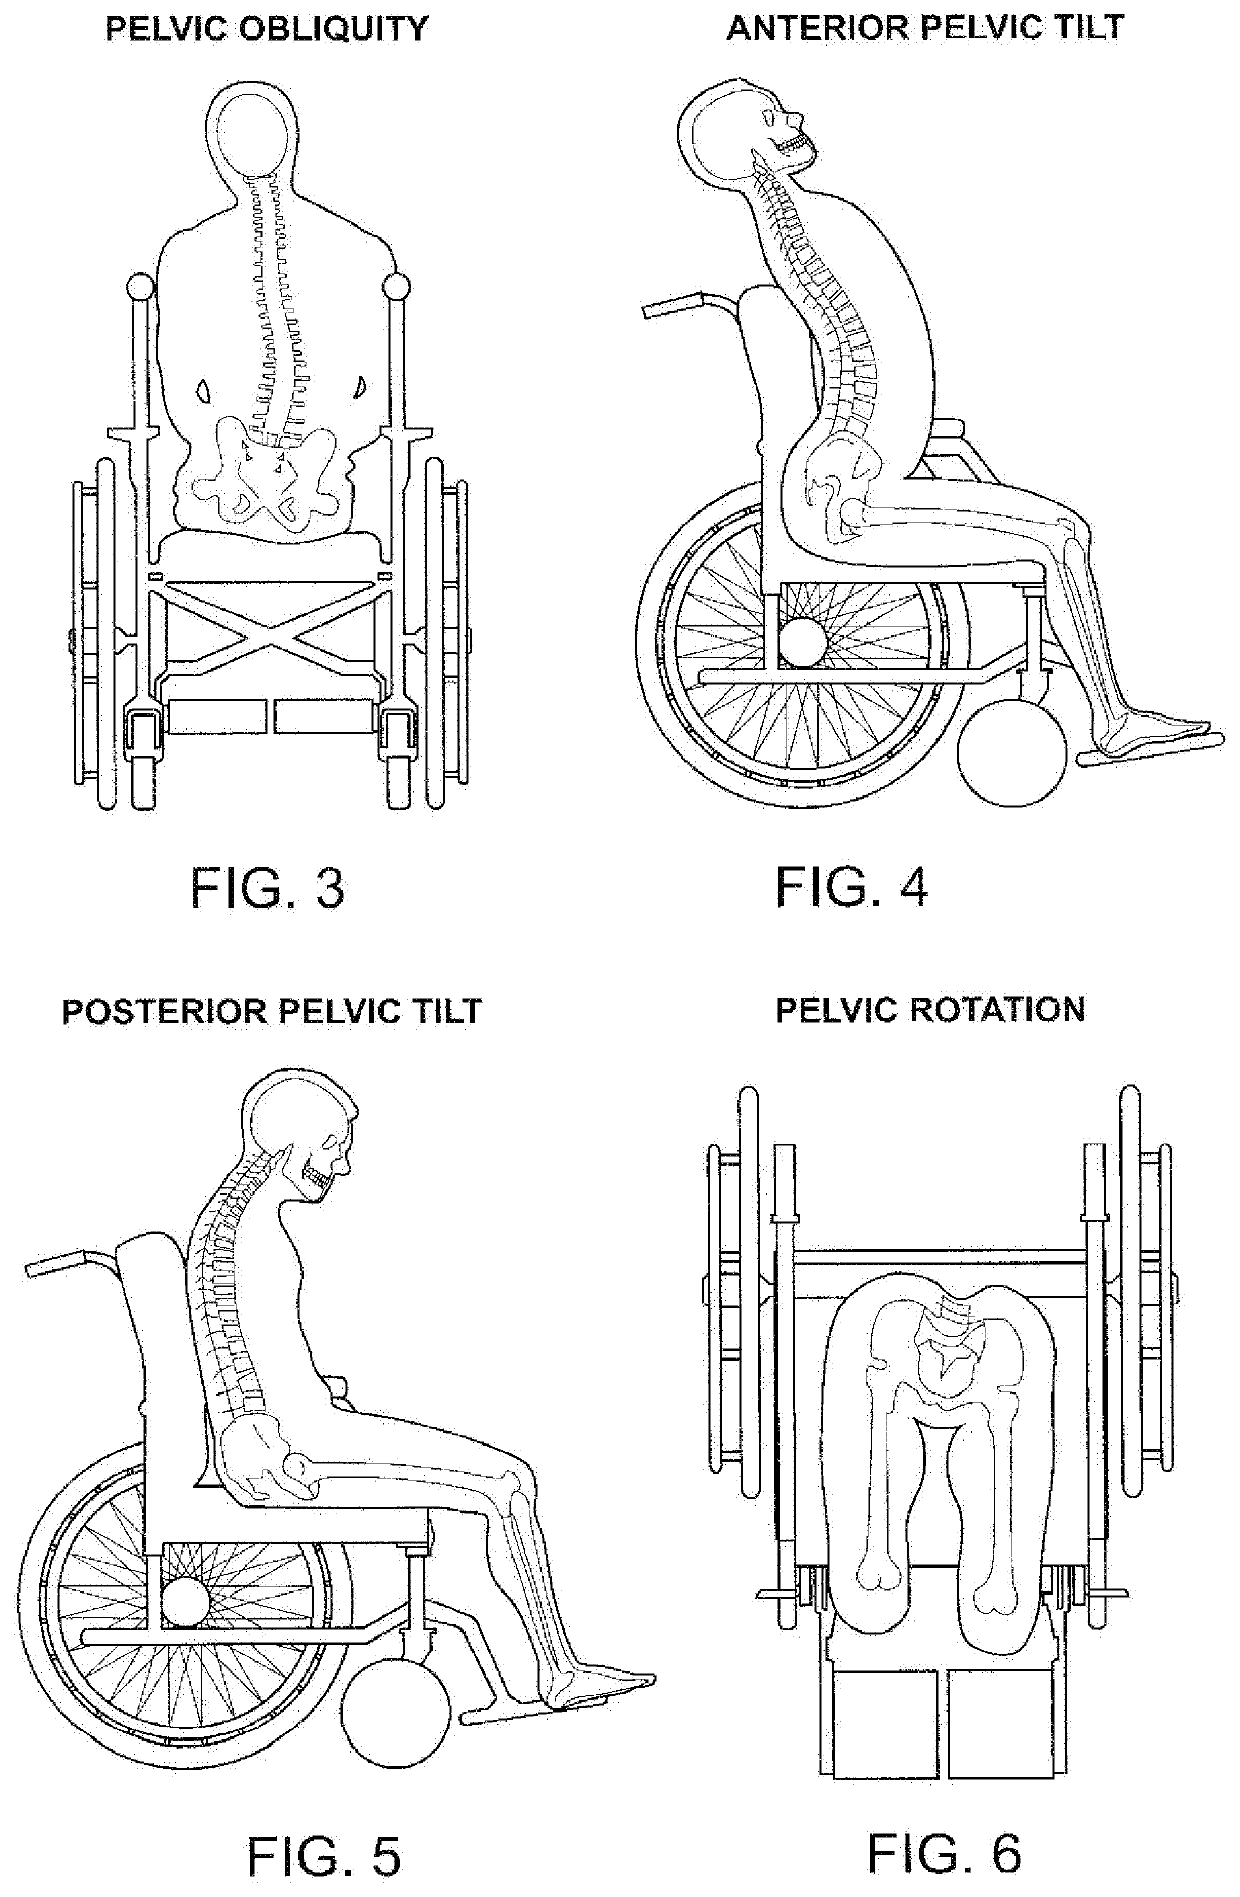 Adjustable anatomical support and seat cushion apparatus for wheelchairs